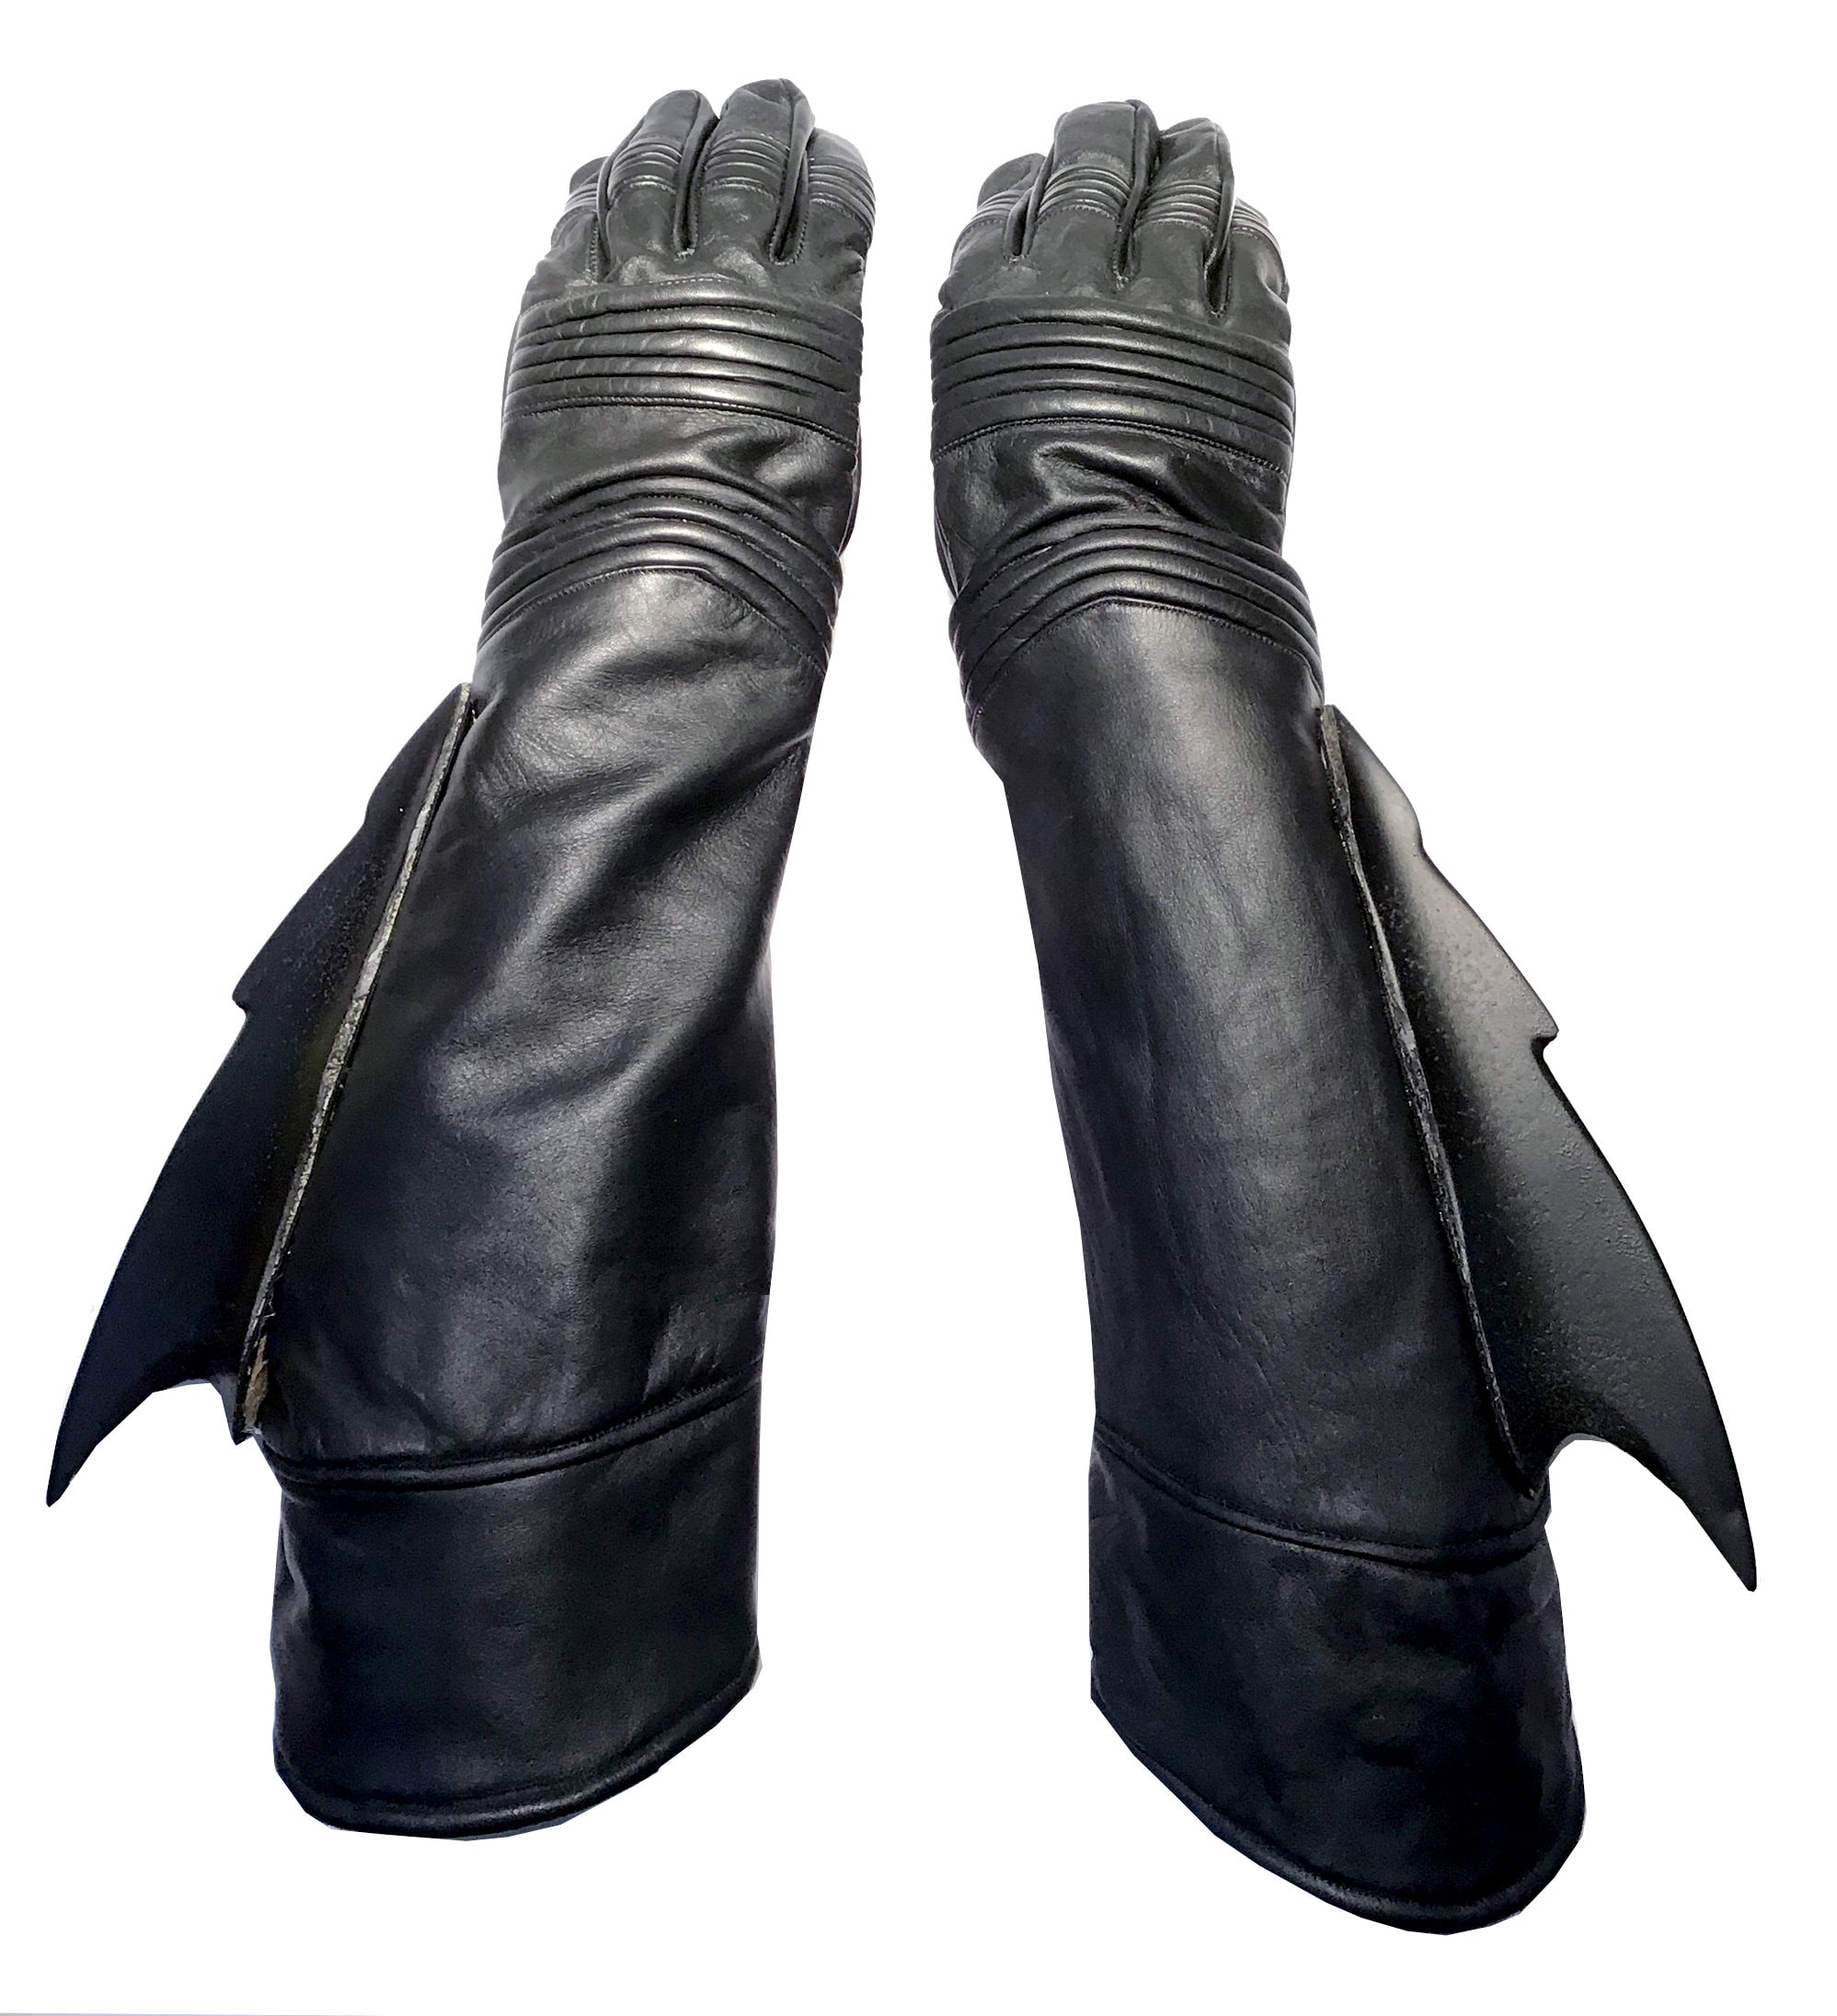 1995/1997 Bat Authentic Leather Cosplay Gloves | Etsy